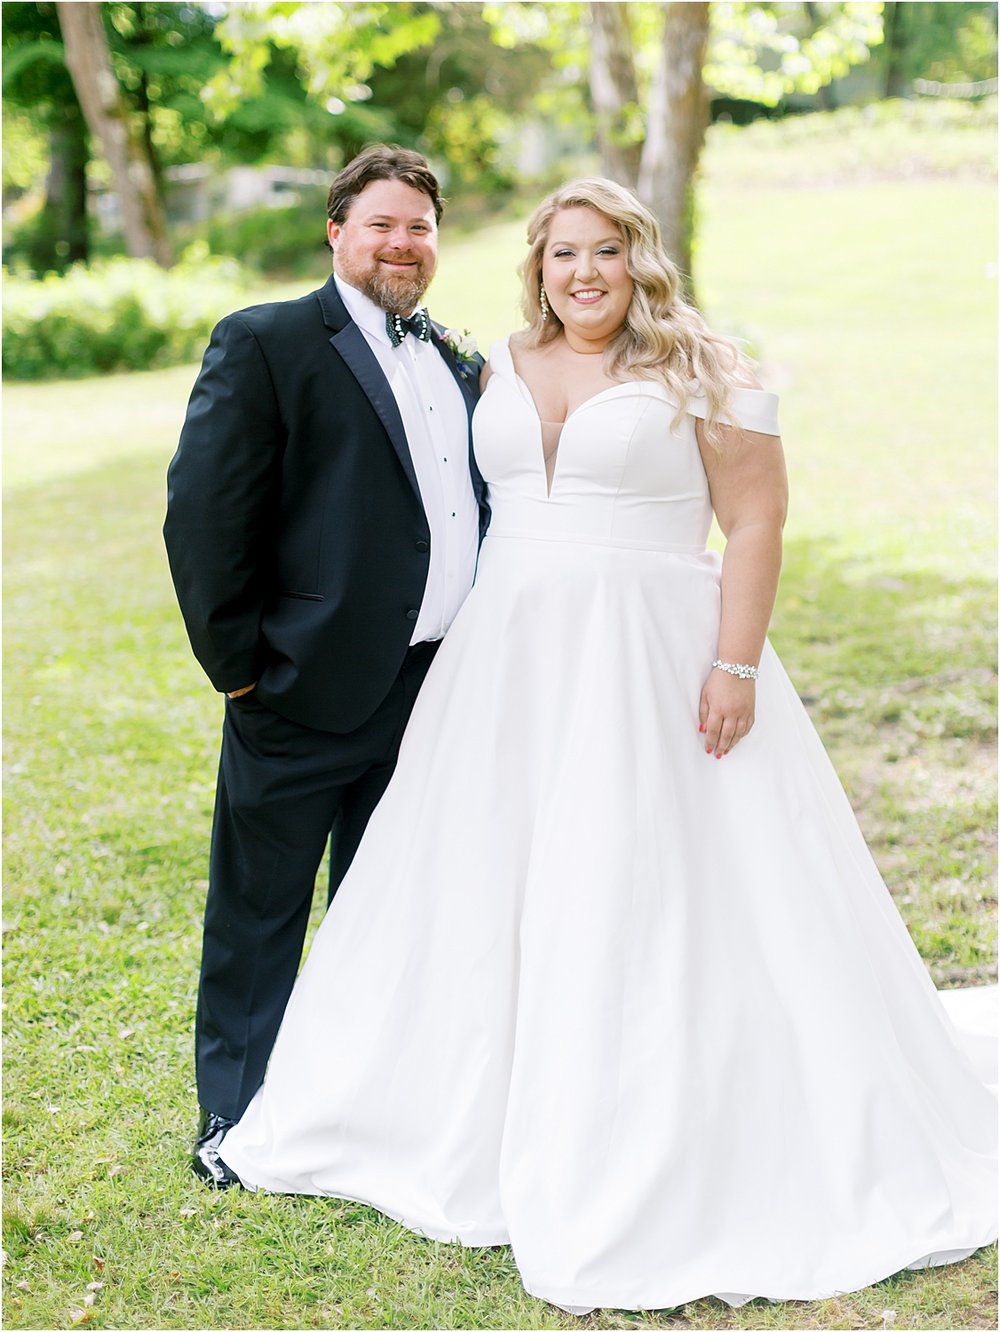 Southern charm and elegant Bride and Groom